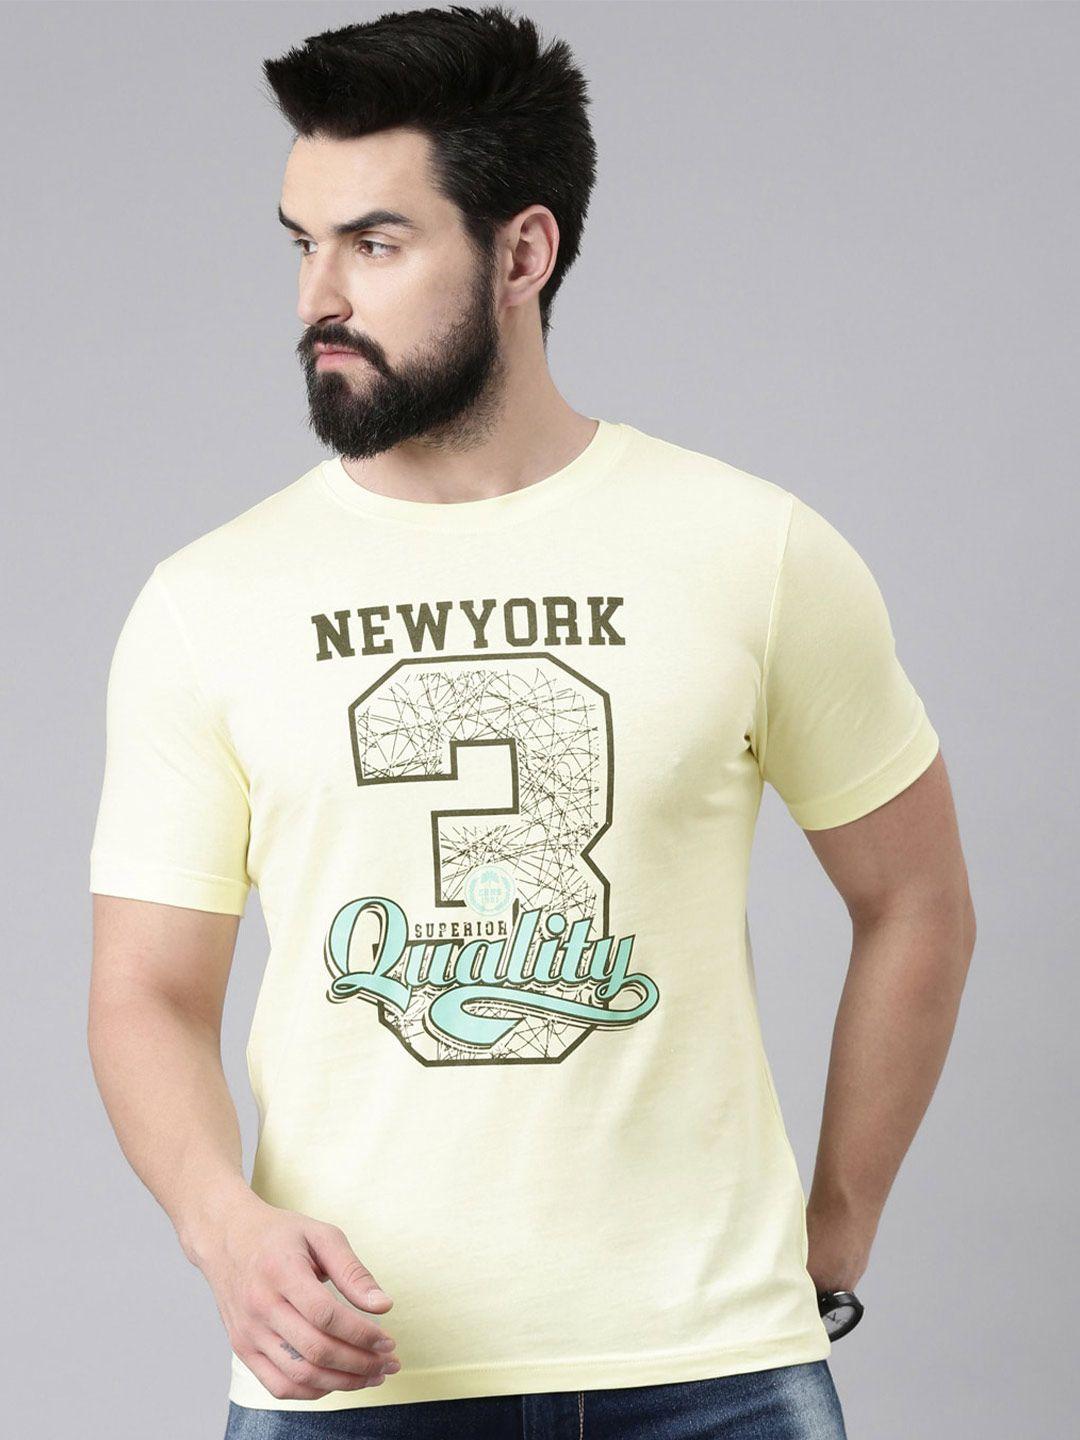 chennis typography printed pure cotton slim fit t-shirt